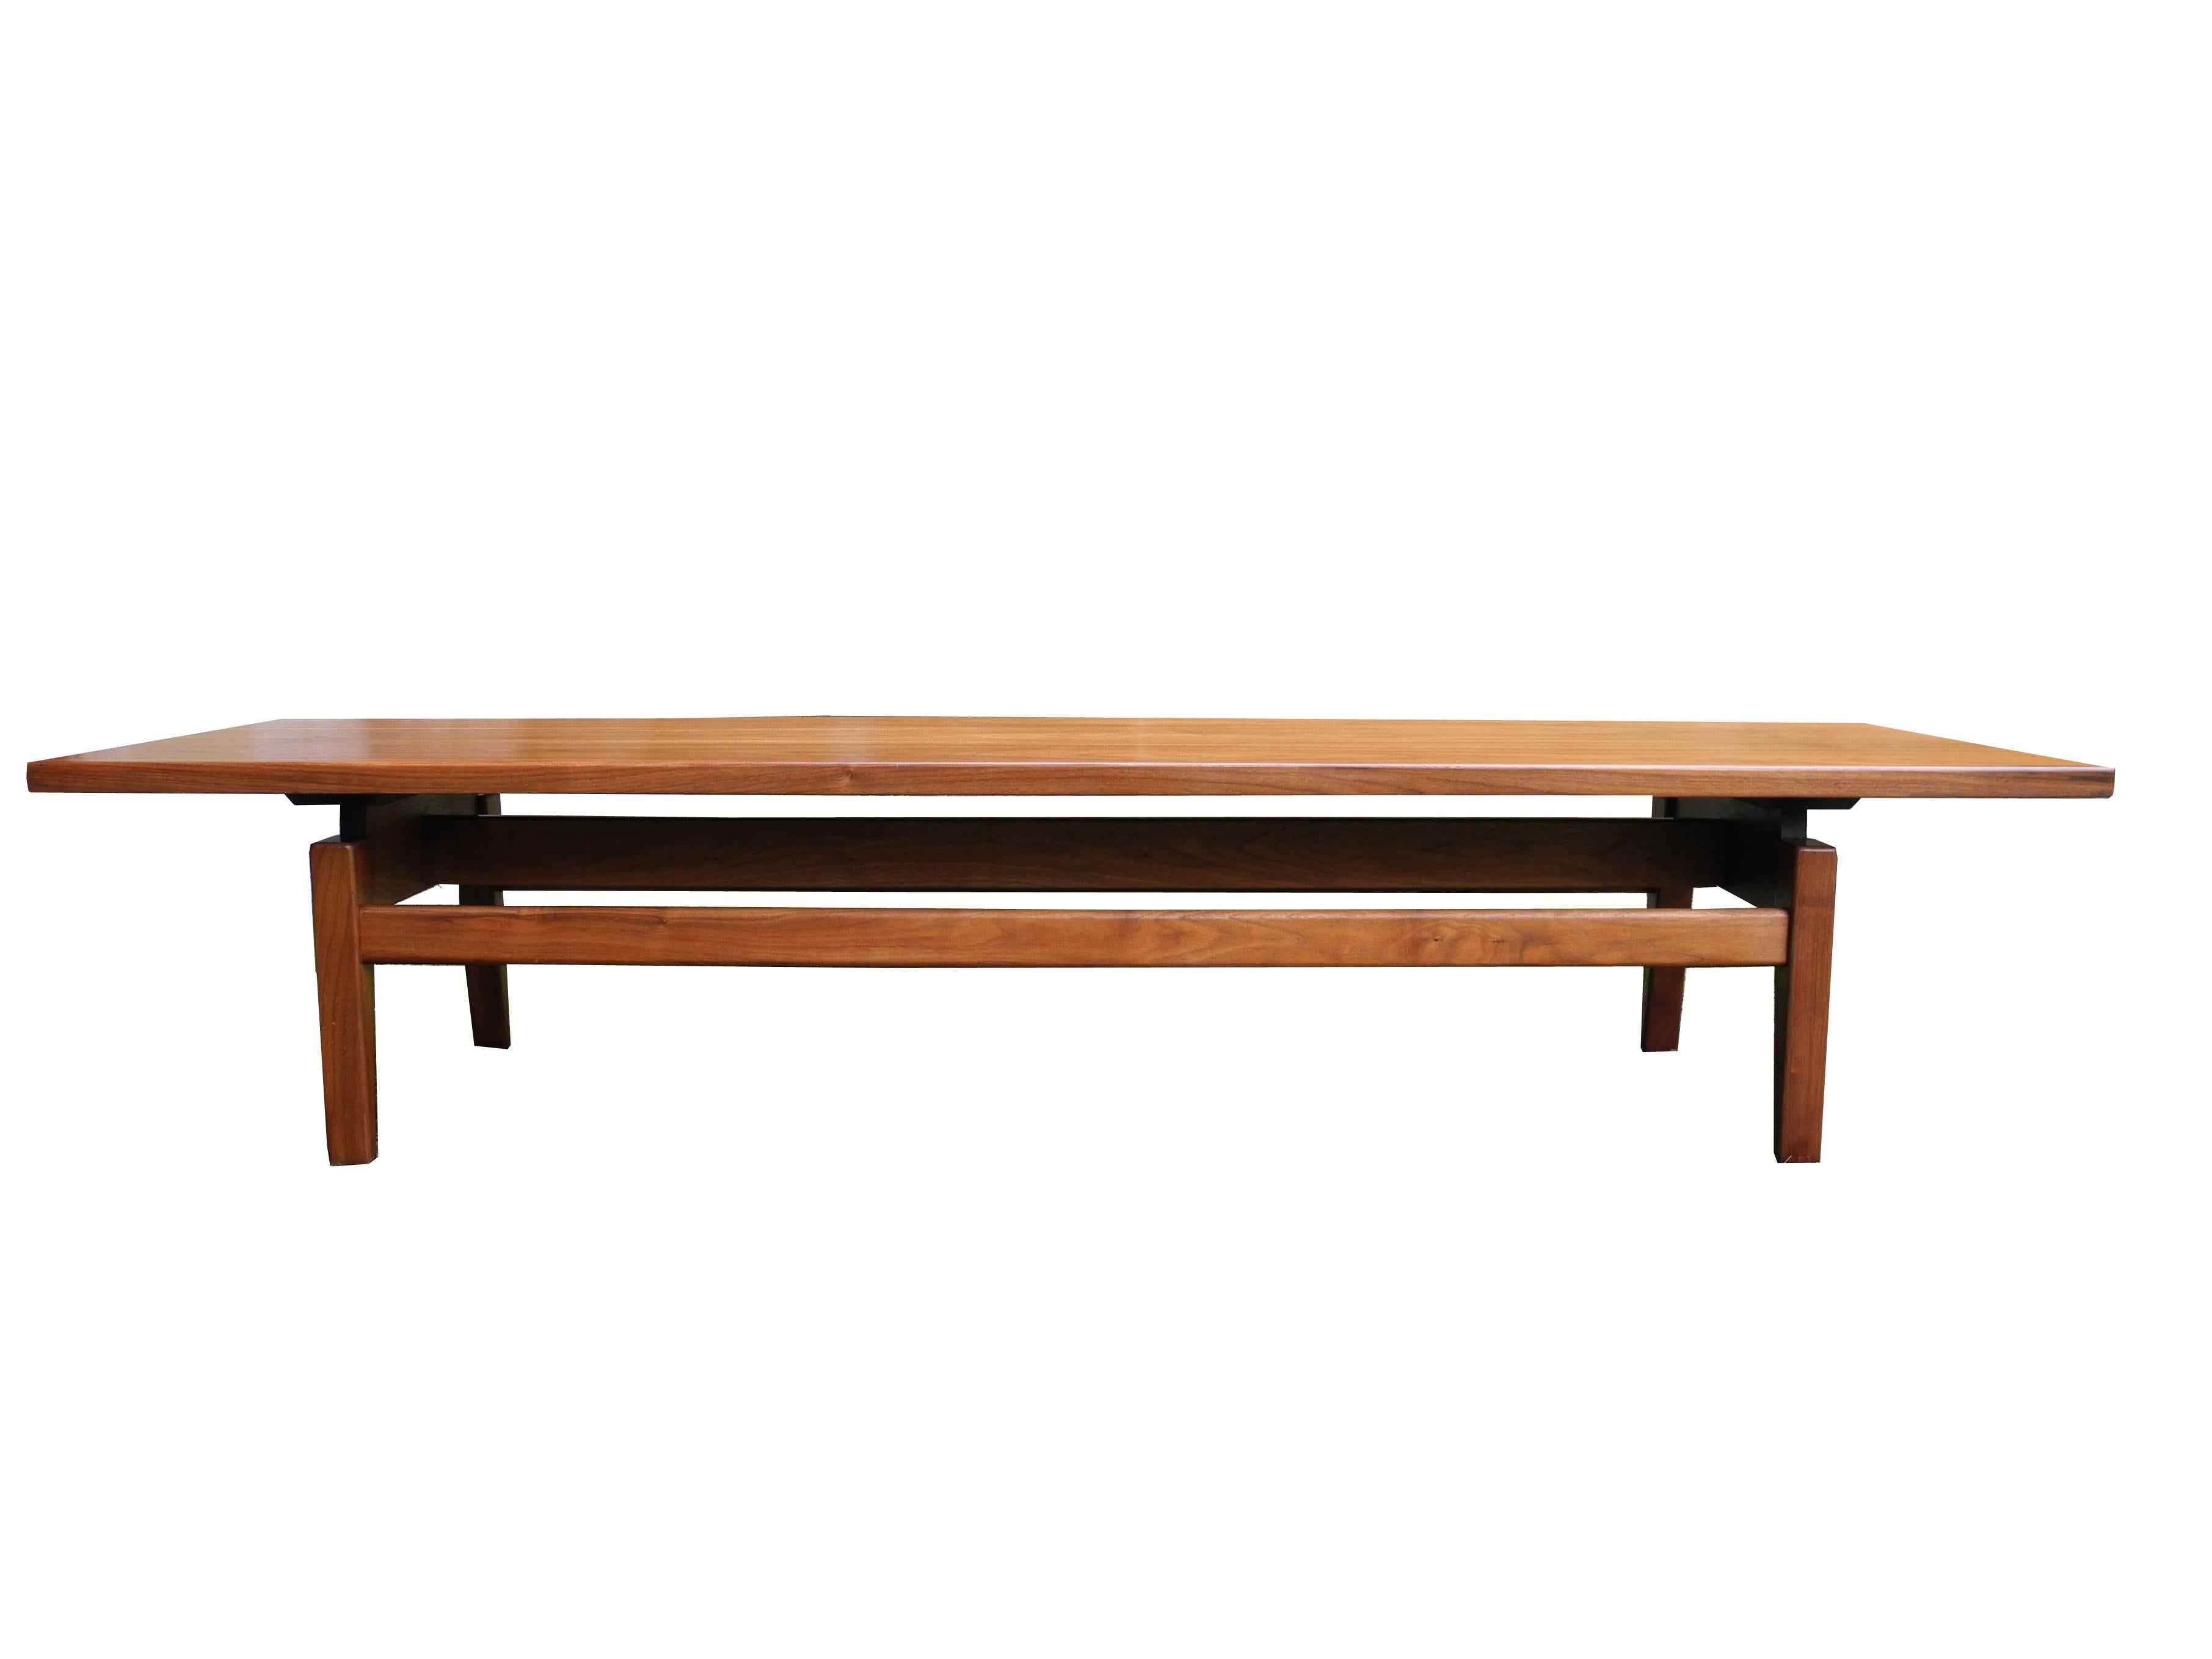 This walnut coffee table is made of solid wood. The natural finish on the wood brings out the beauty of the grain and the true color of the walnut. This original vintage bench was made in the 1950s by Jens Risom the Danish American furniture